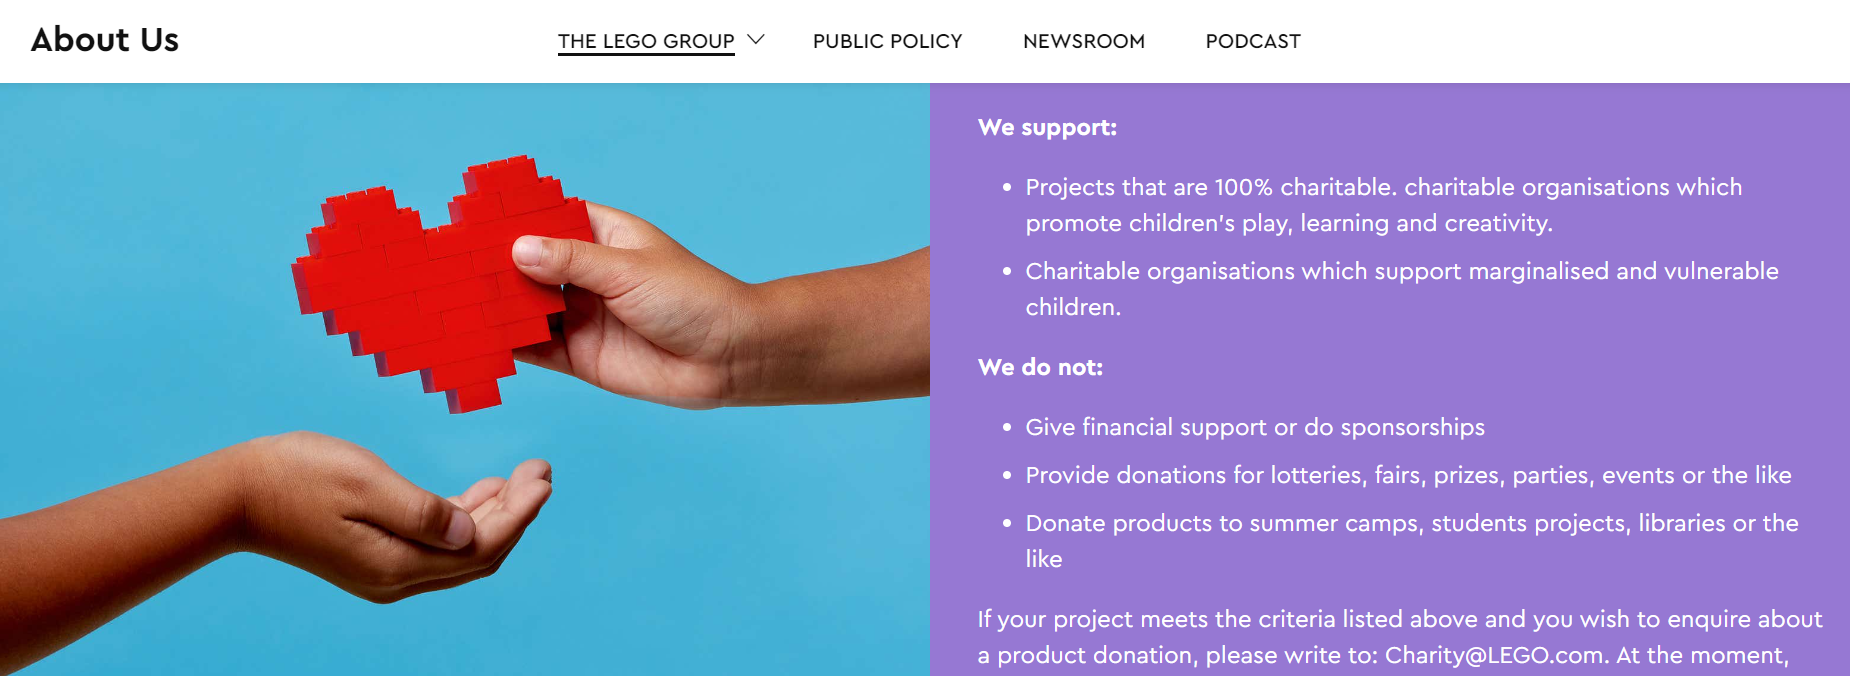 Lego donates to fundraisers and charities